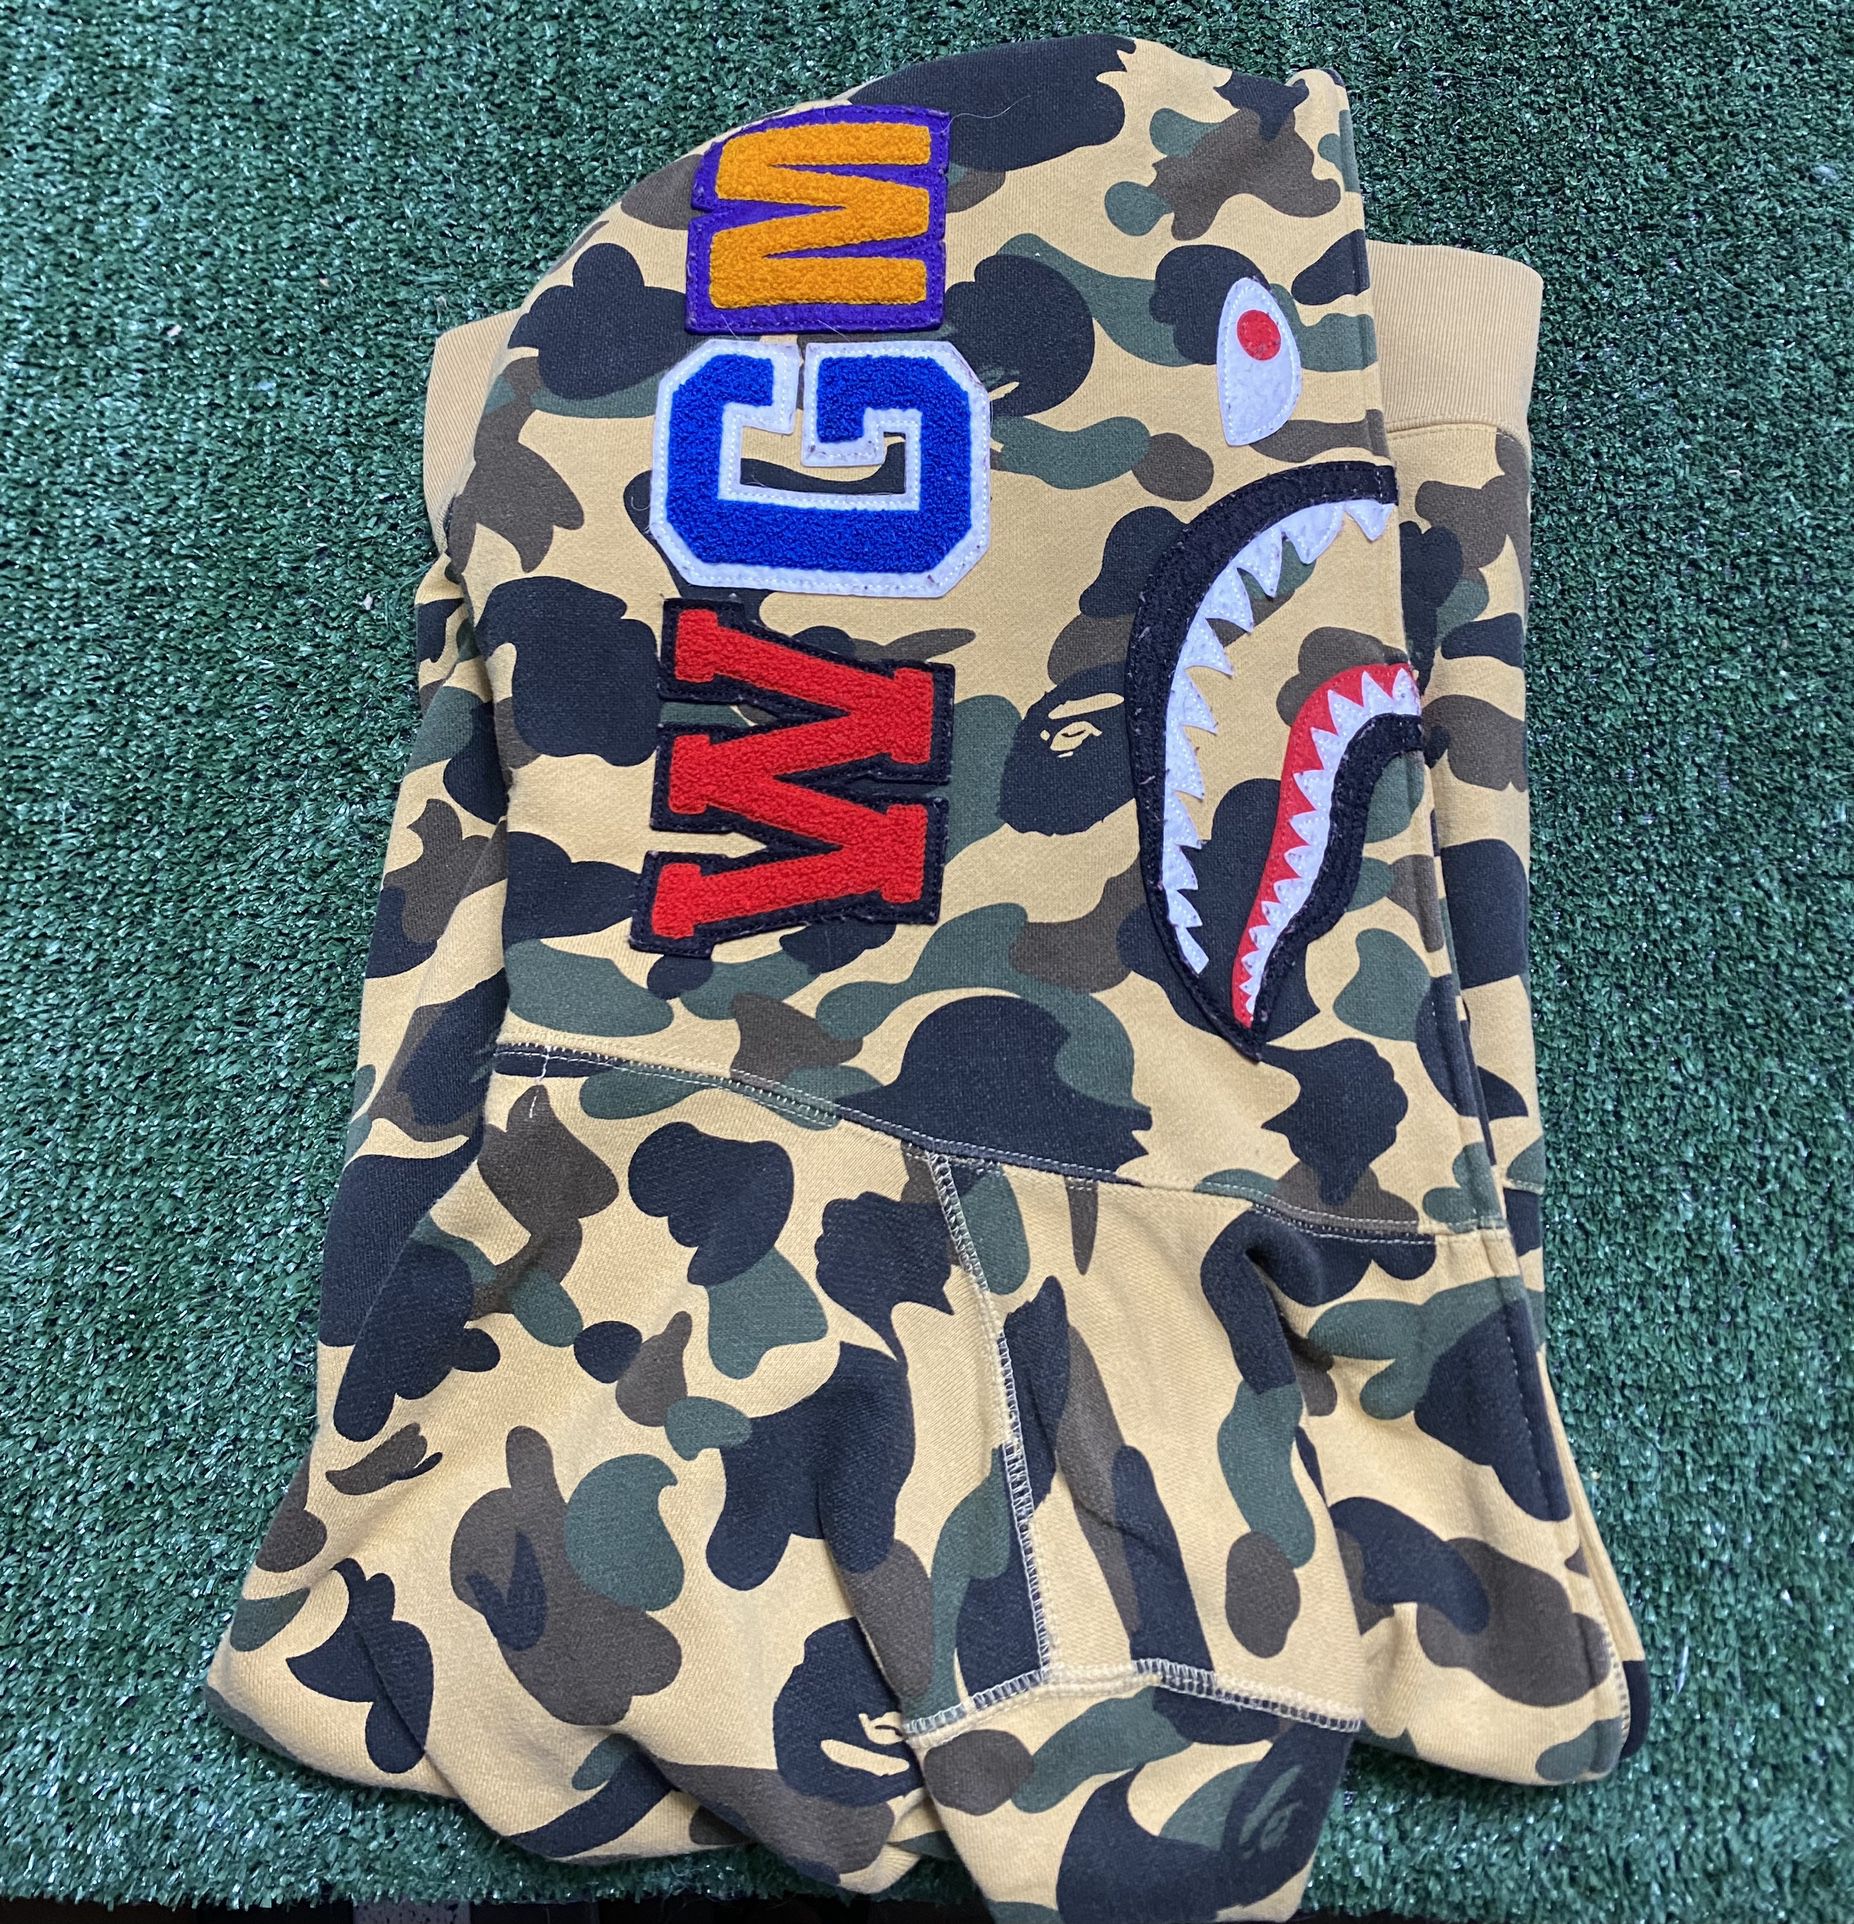 BAPE 1st Camo Shark Full Zip Hoodie Yellow size XL USED But Clean